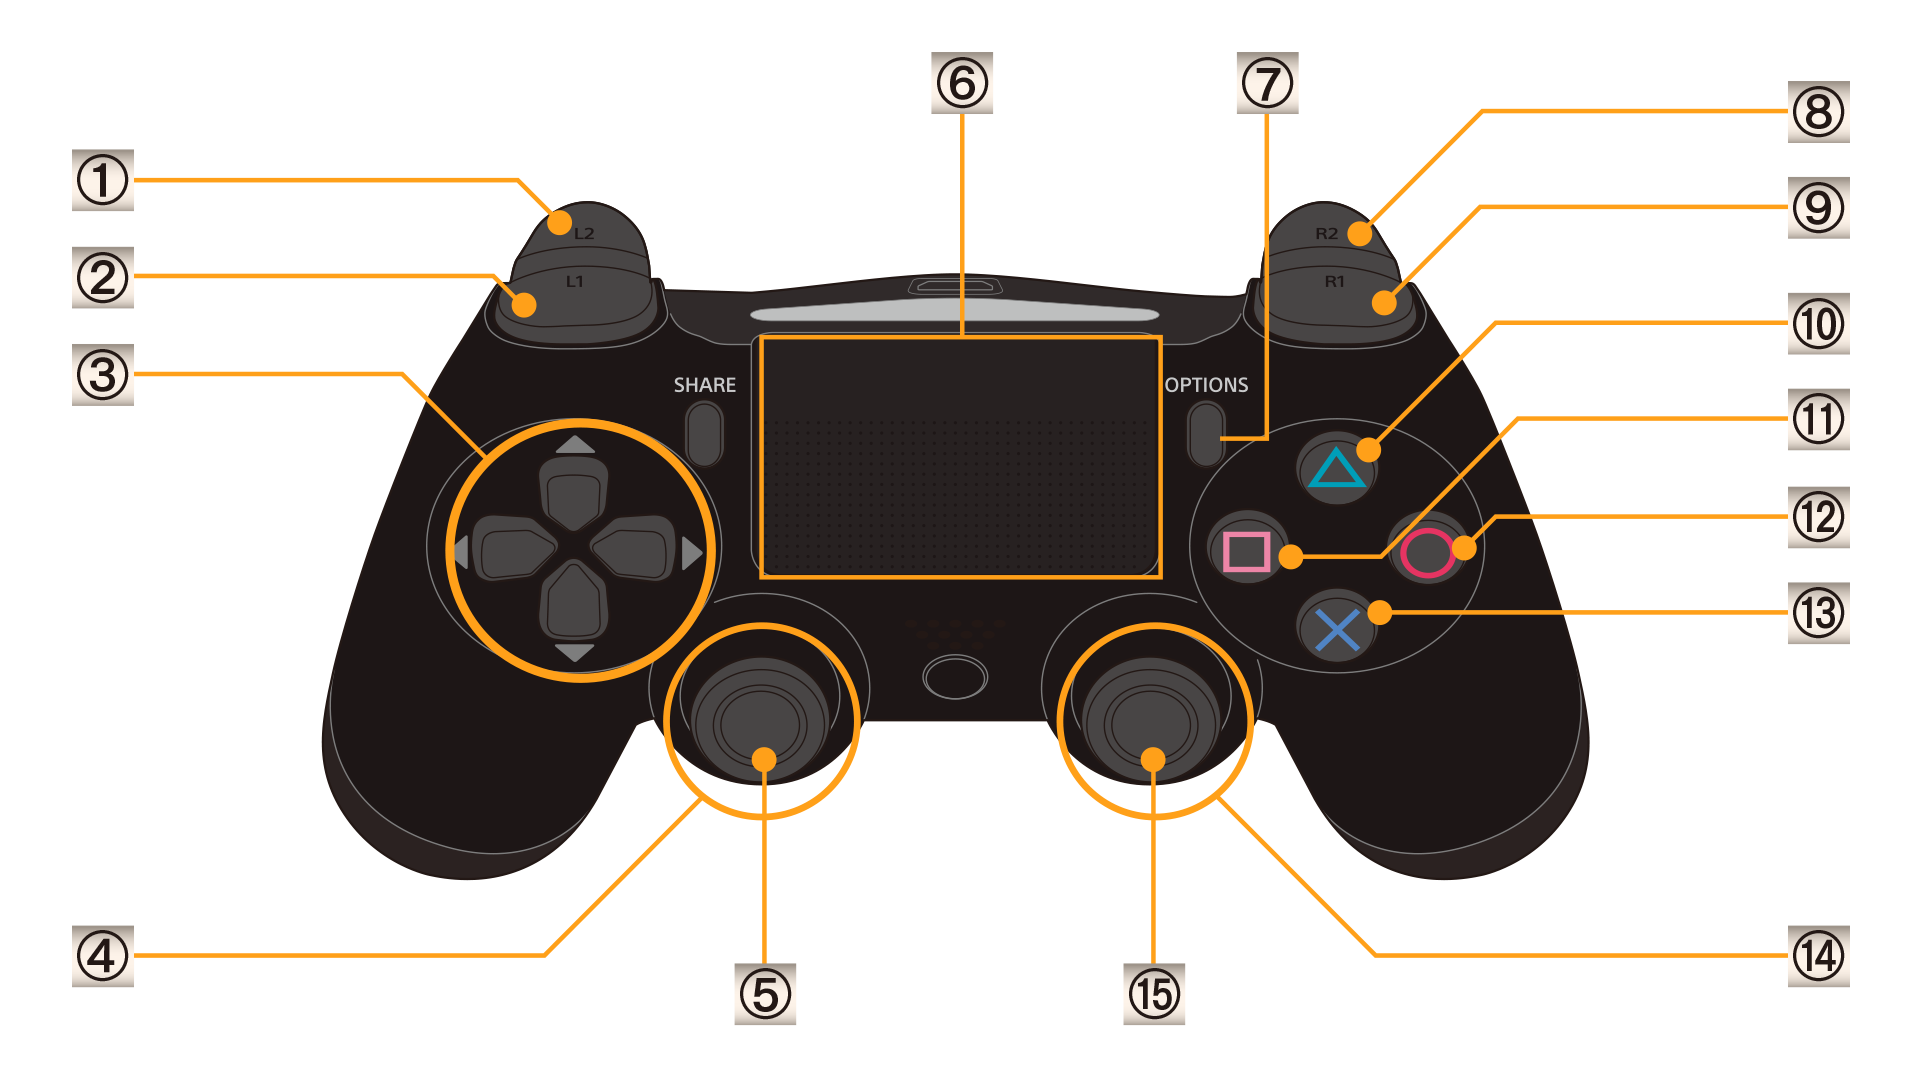 does resident evil 7 use move controllers